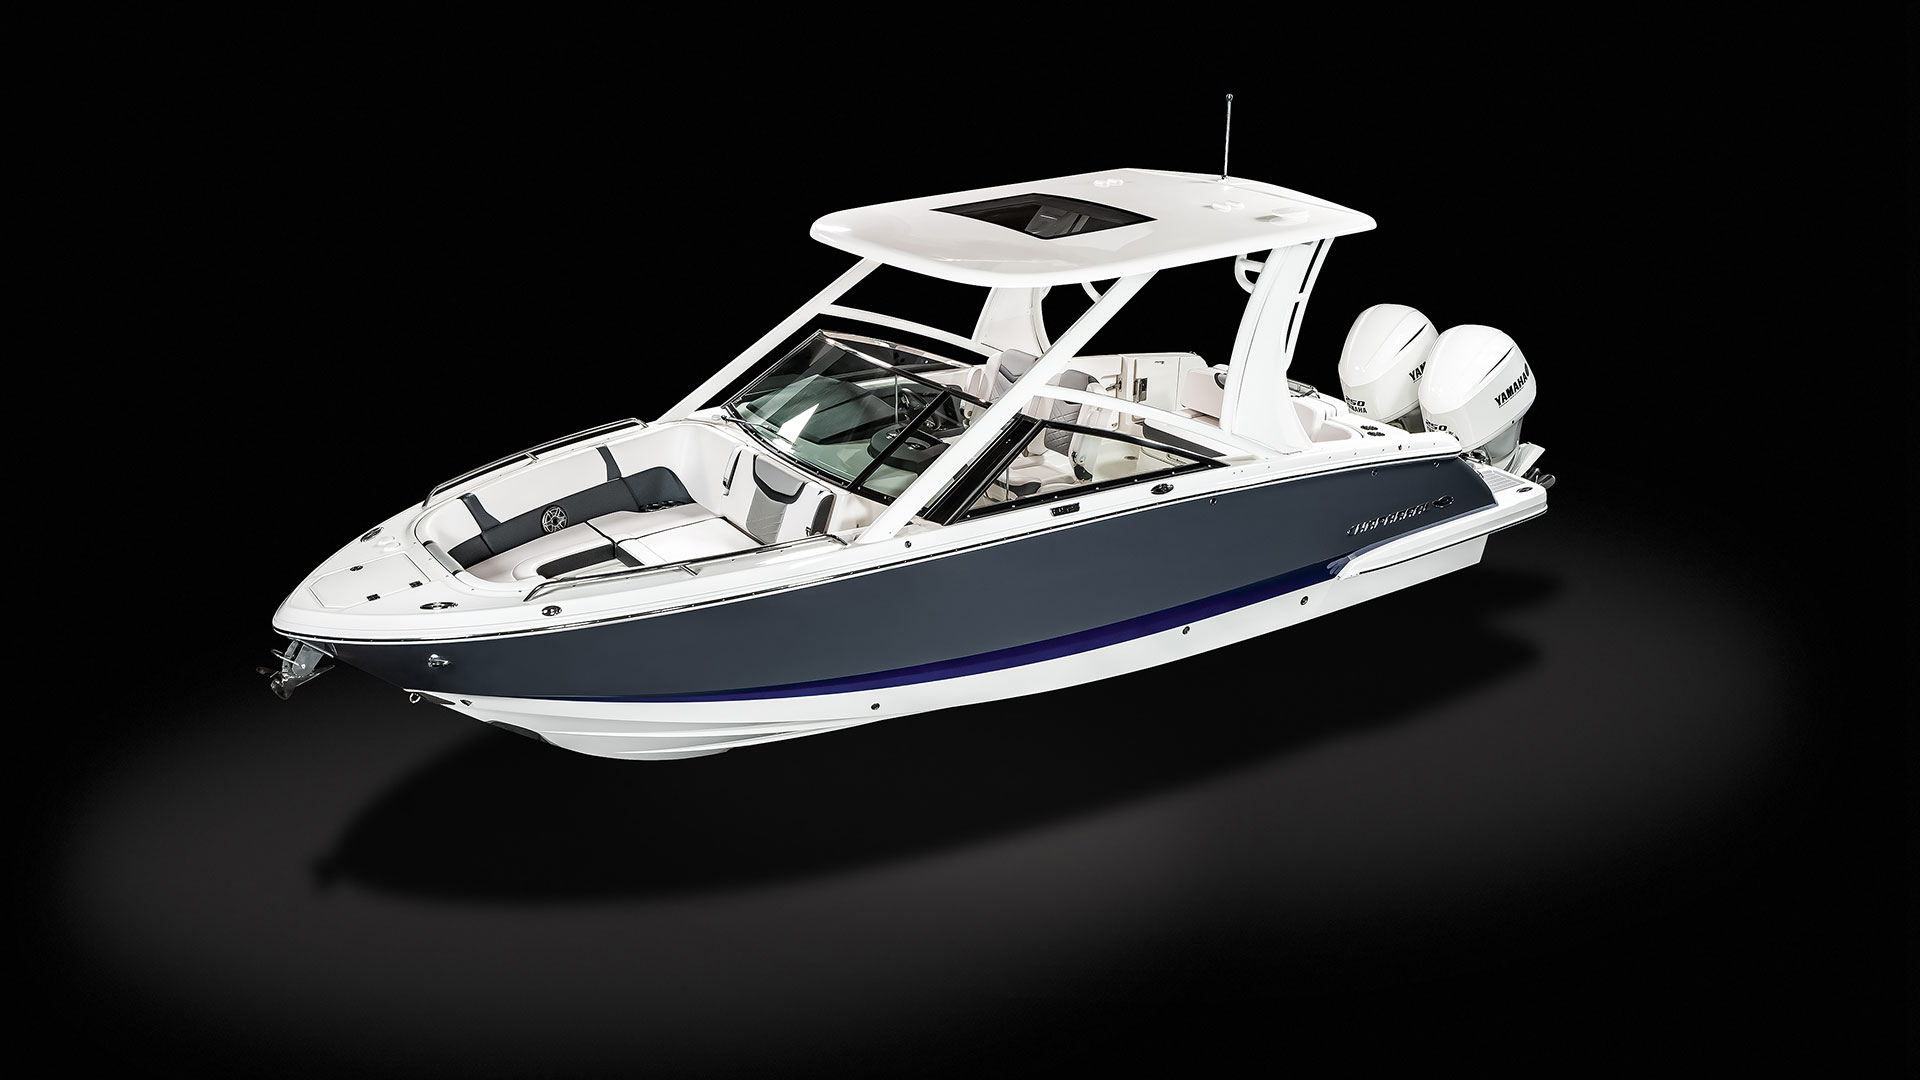 https://www.chaparralboats.com/images/boat_pages/osx270_20/hero/megatron.jpg